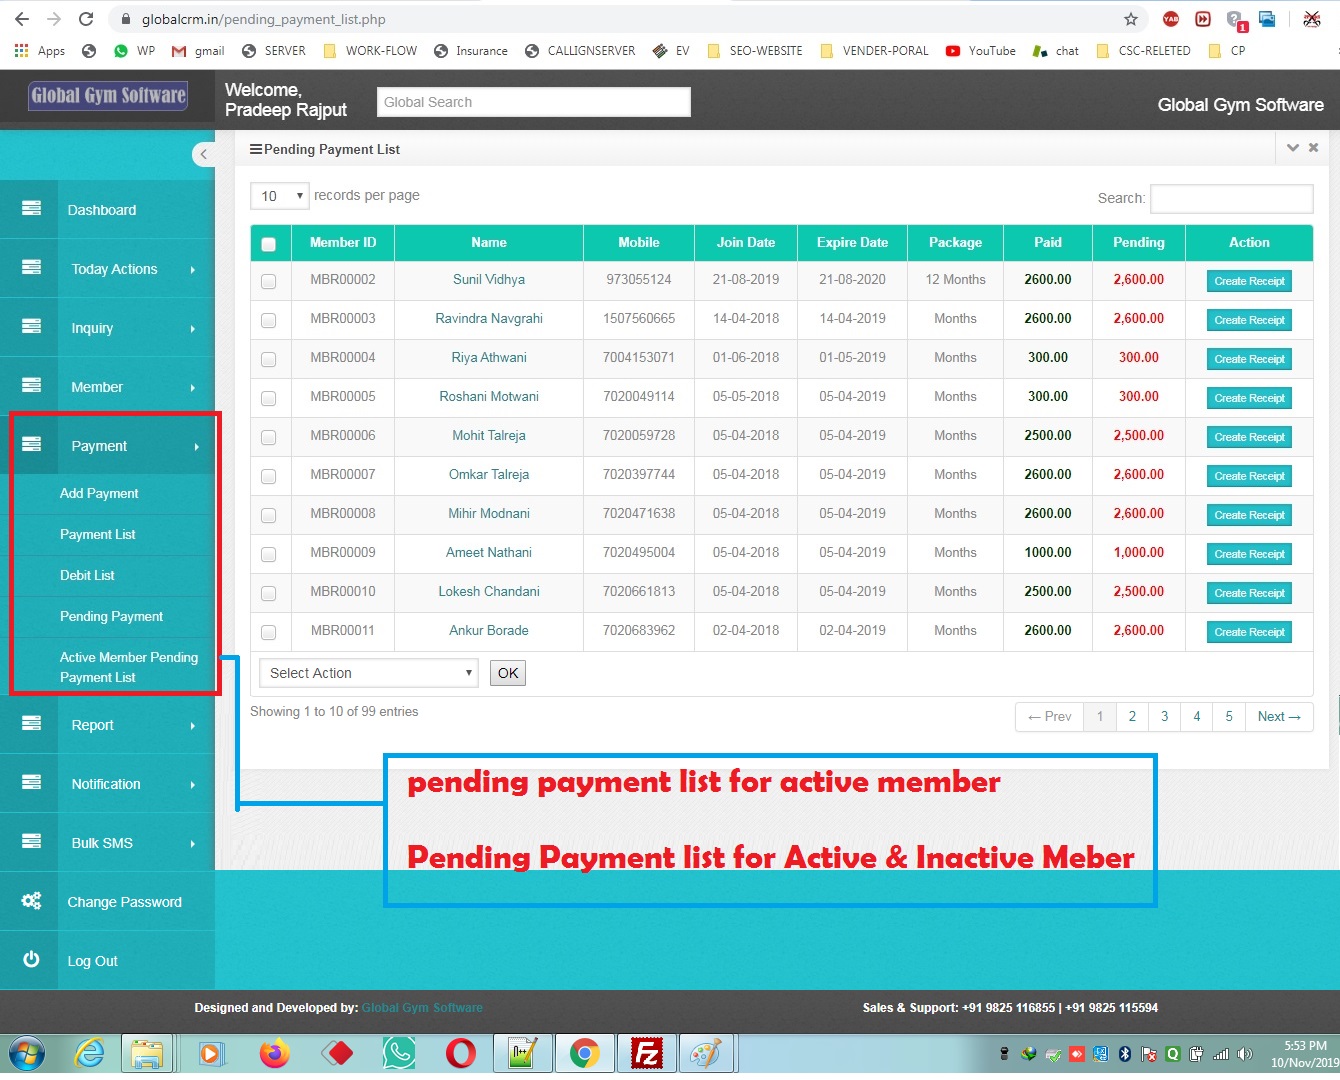 pending payment list active member and inactive member